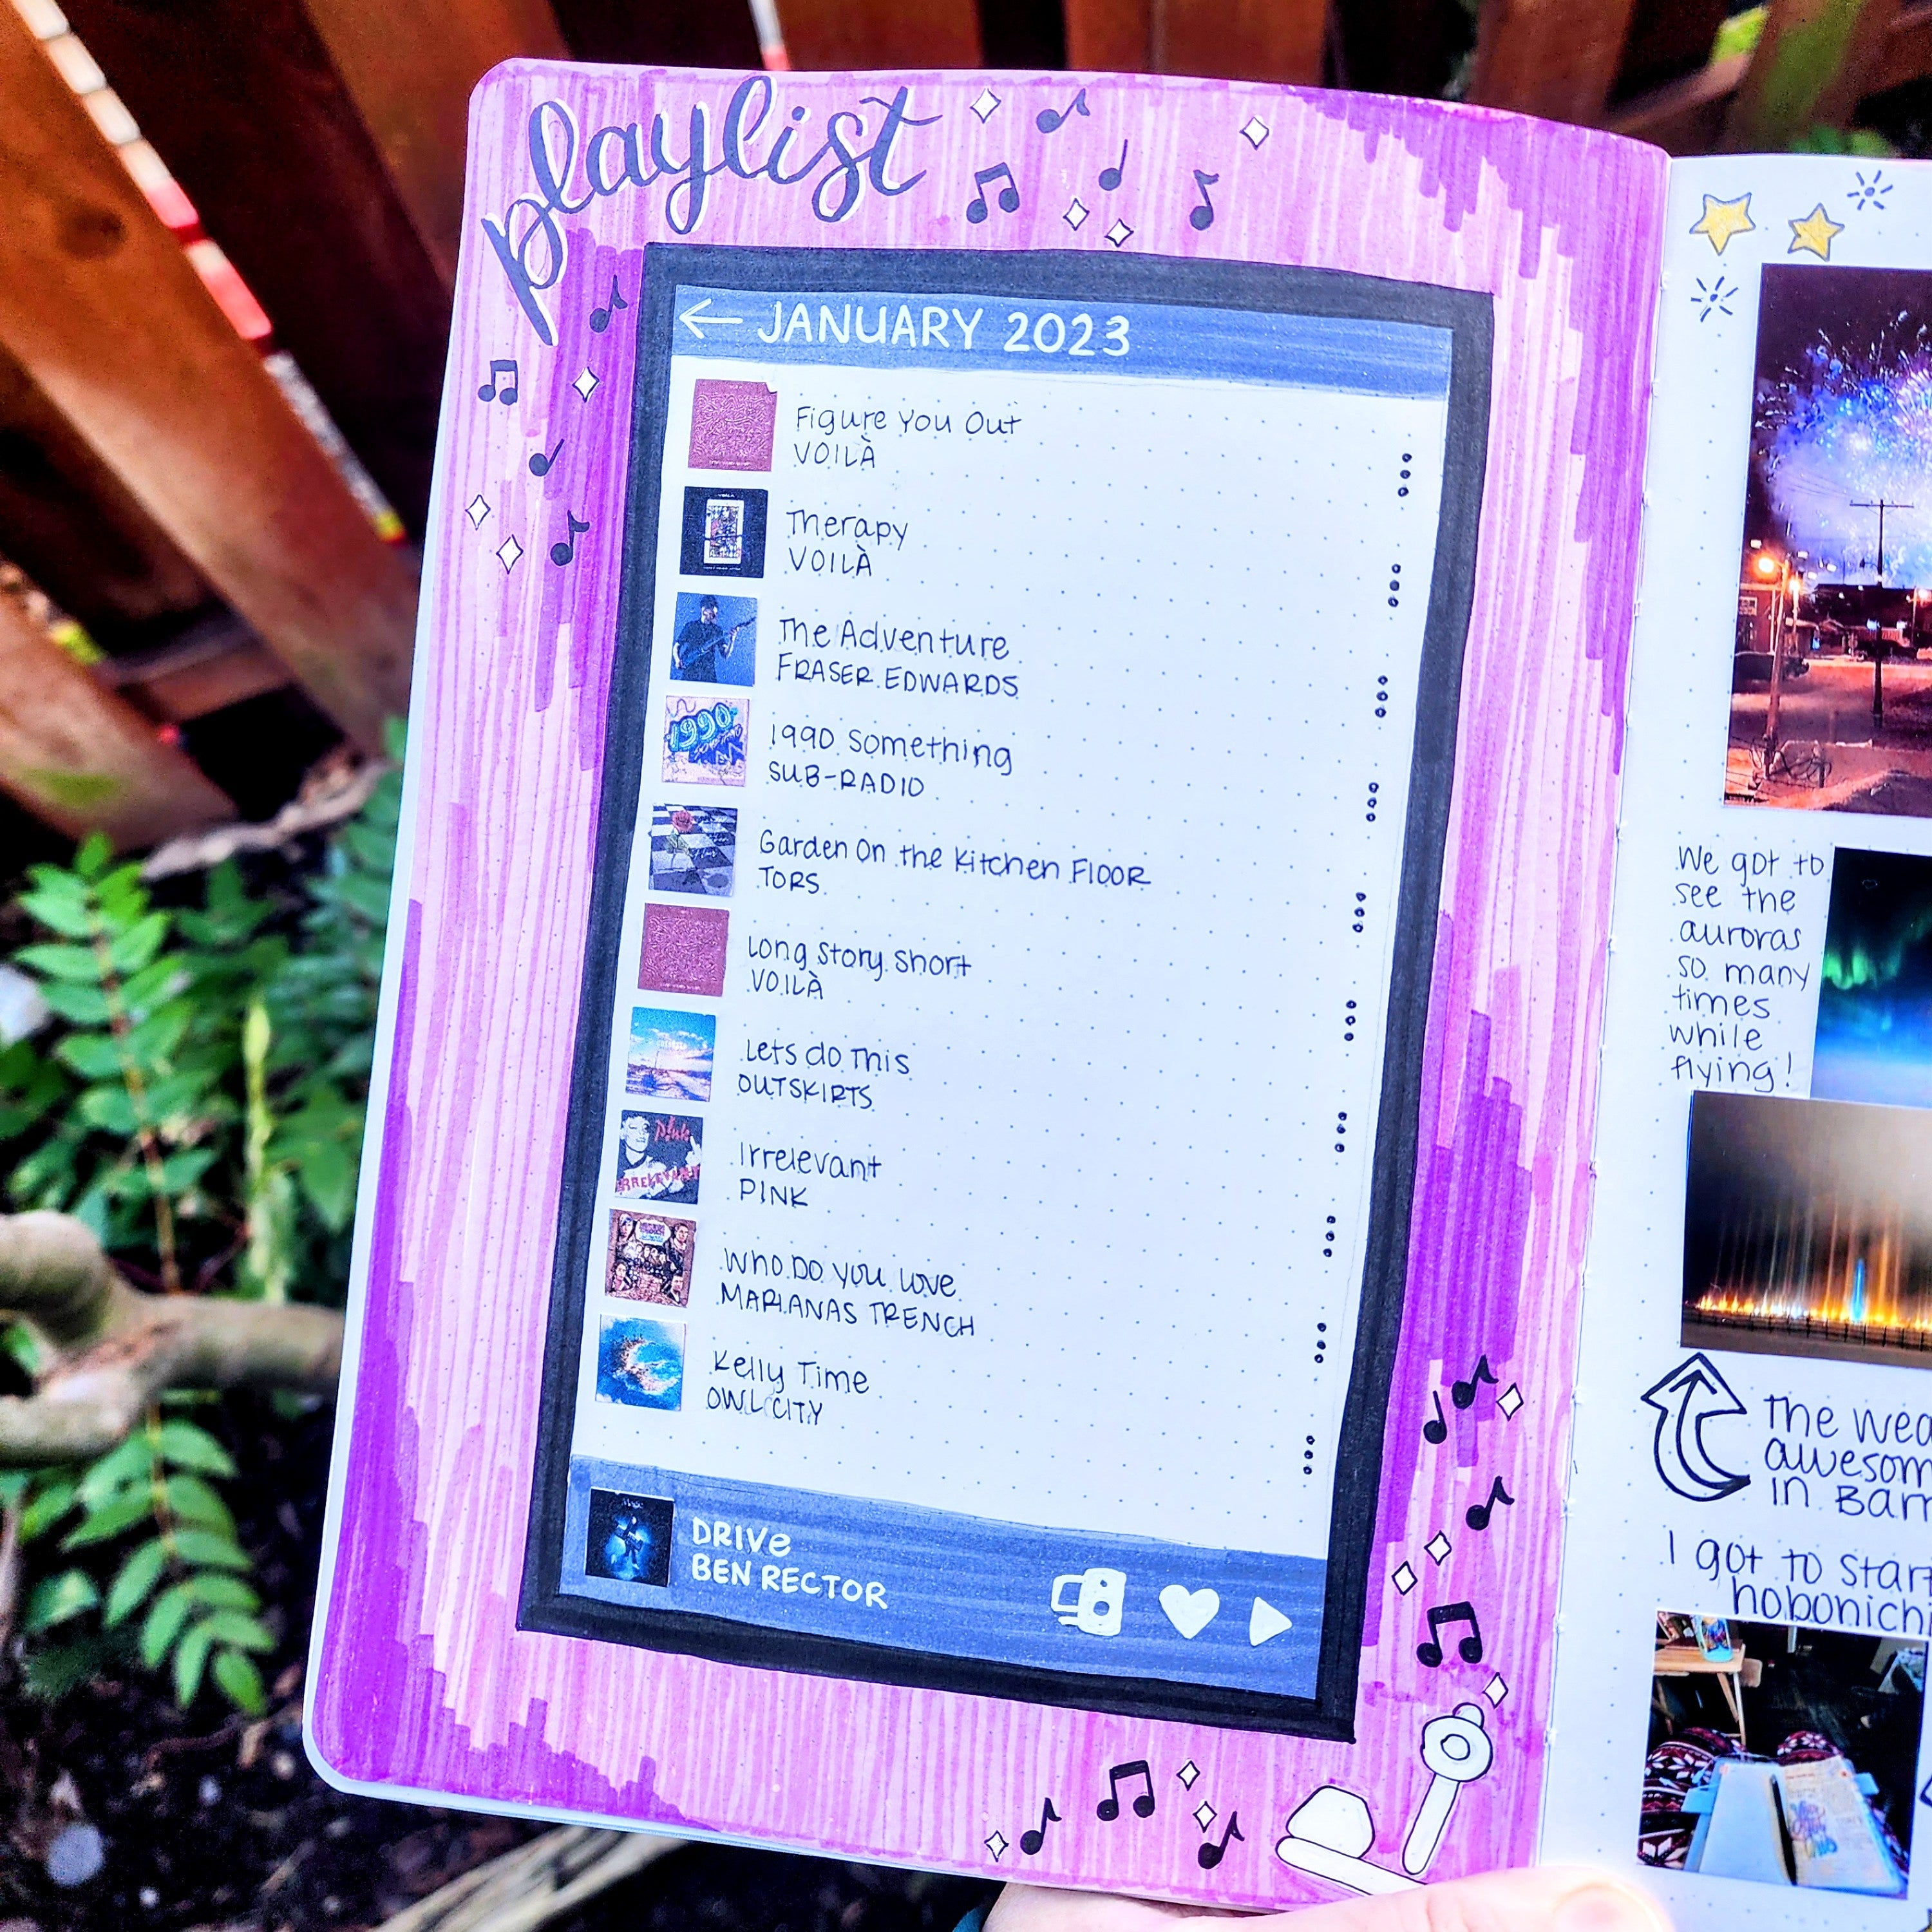 Documenting fun memories in your journal, like your current playlist